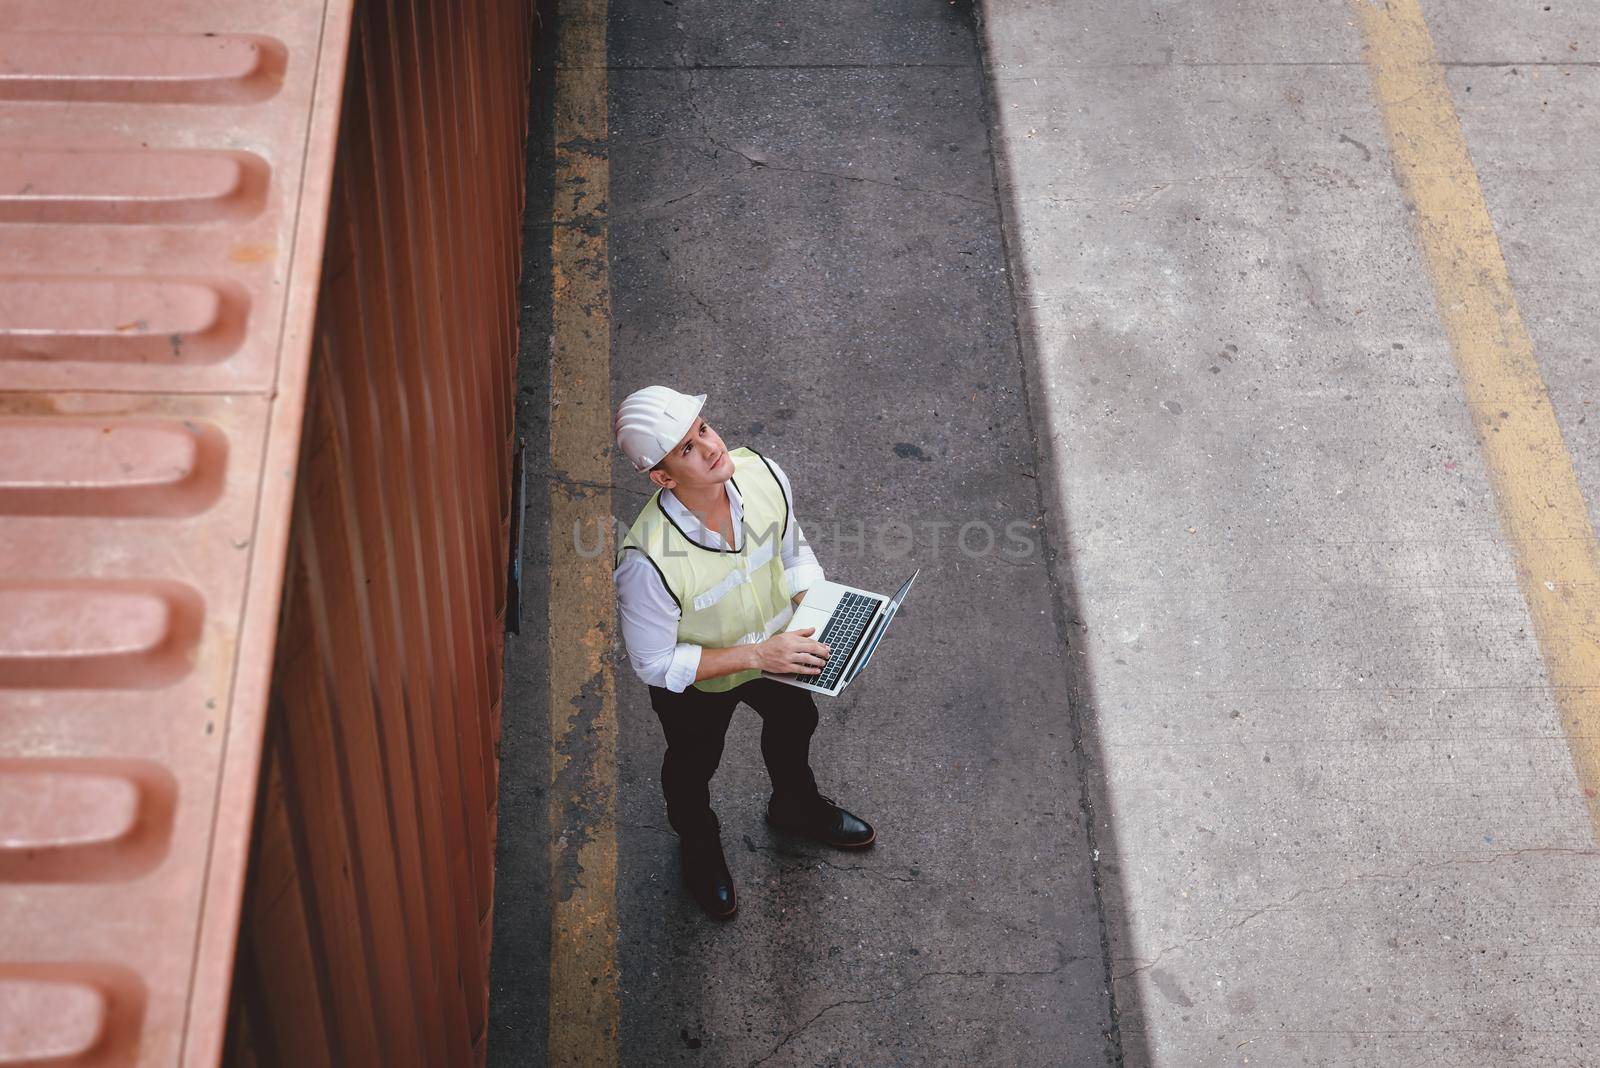 Container Shipping Logistics Engineering of Import/Export Transportation Industry, Transport Engineer is Controlling Management Containers Box on Laptop at Port Ship Loading Dock. Industrial Shipping by MahaHeang245789